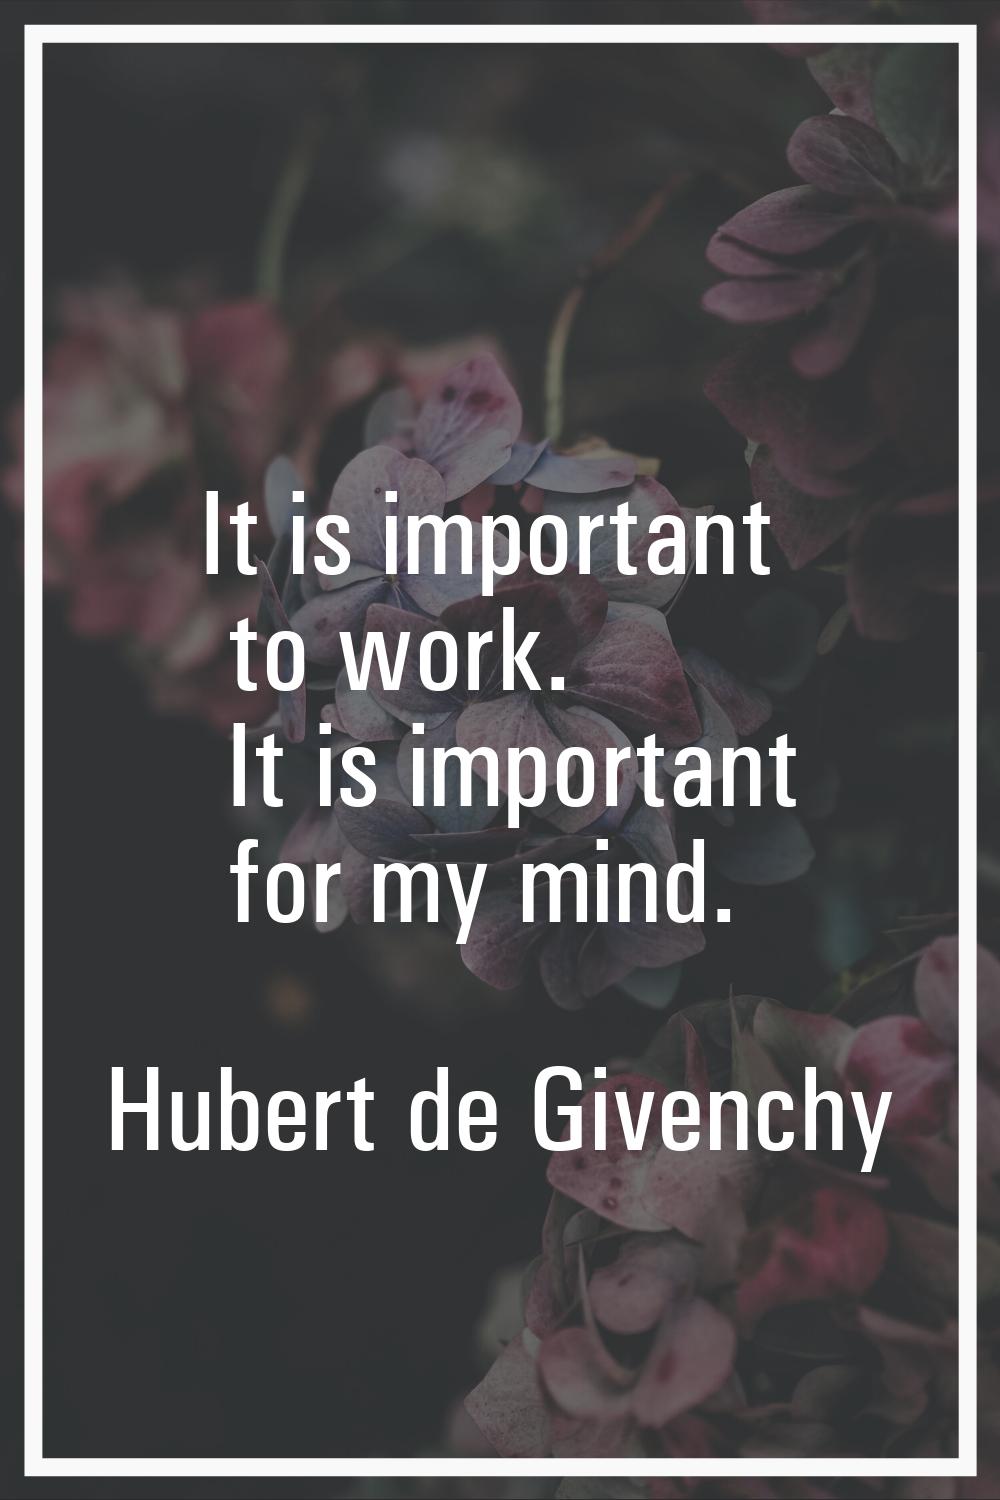 It is important to work. It is important for my mind.